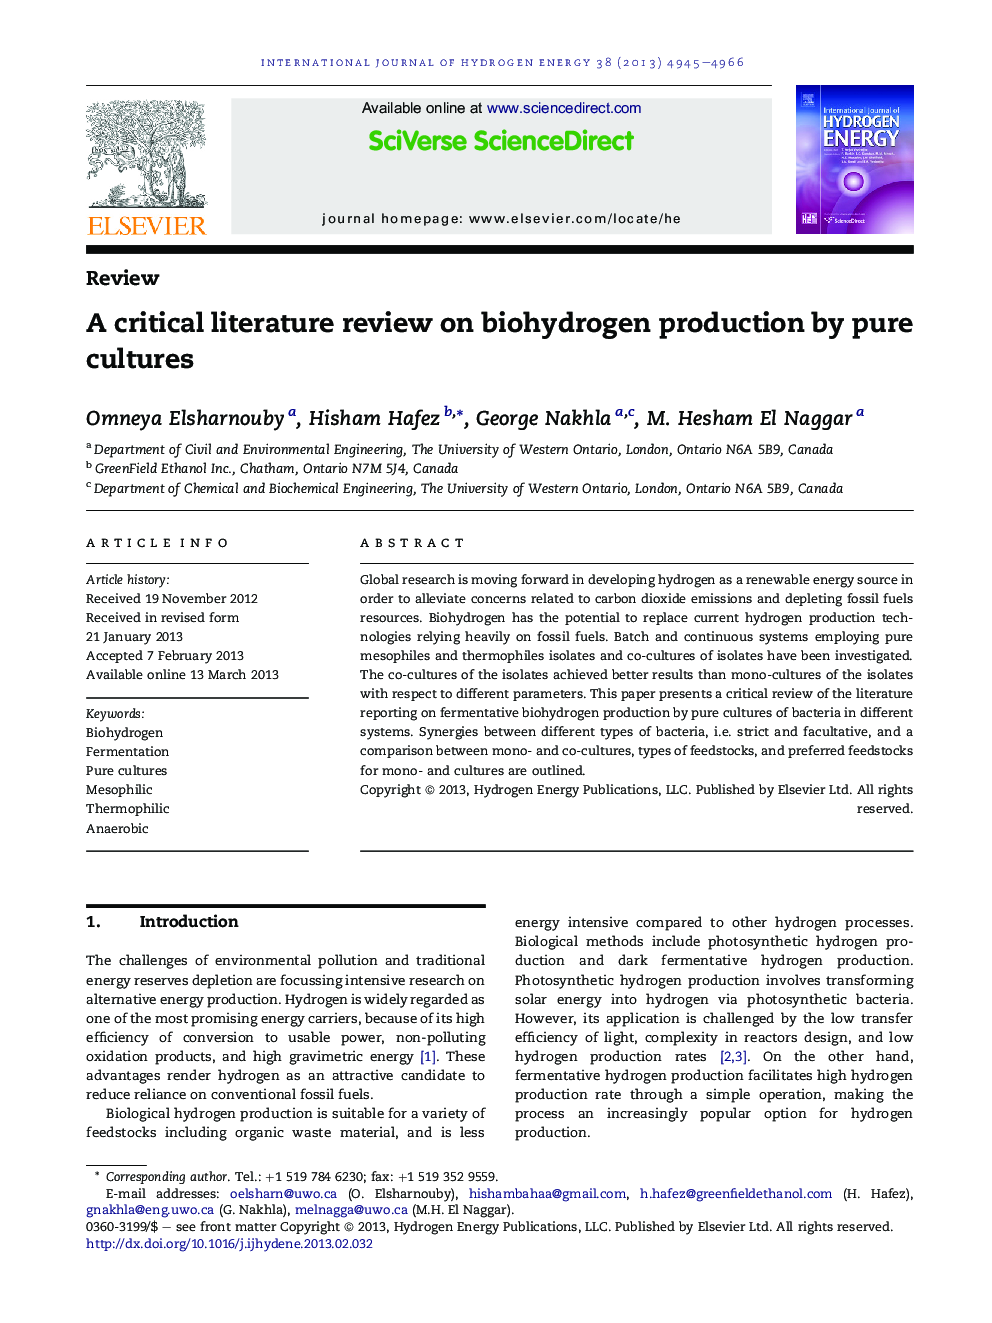 A critical literature review on biohydrogen production by pure cultures